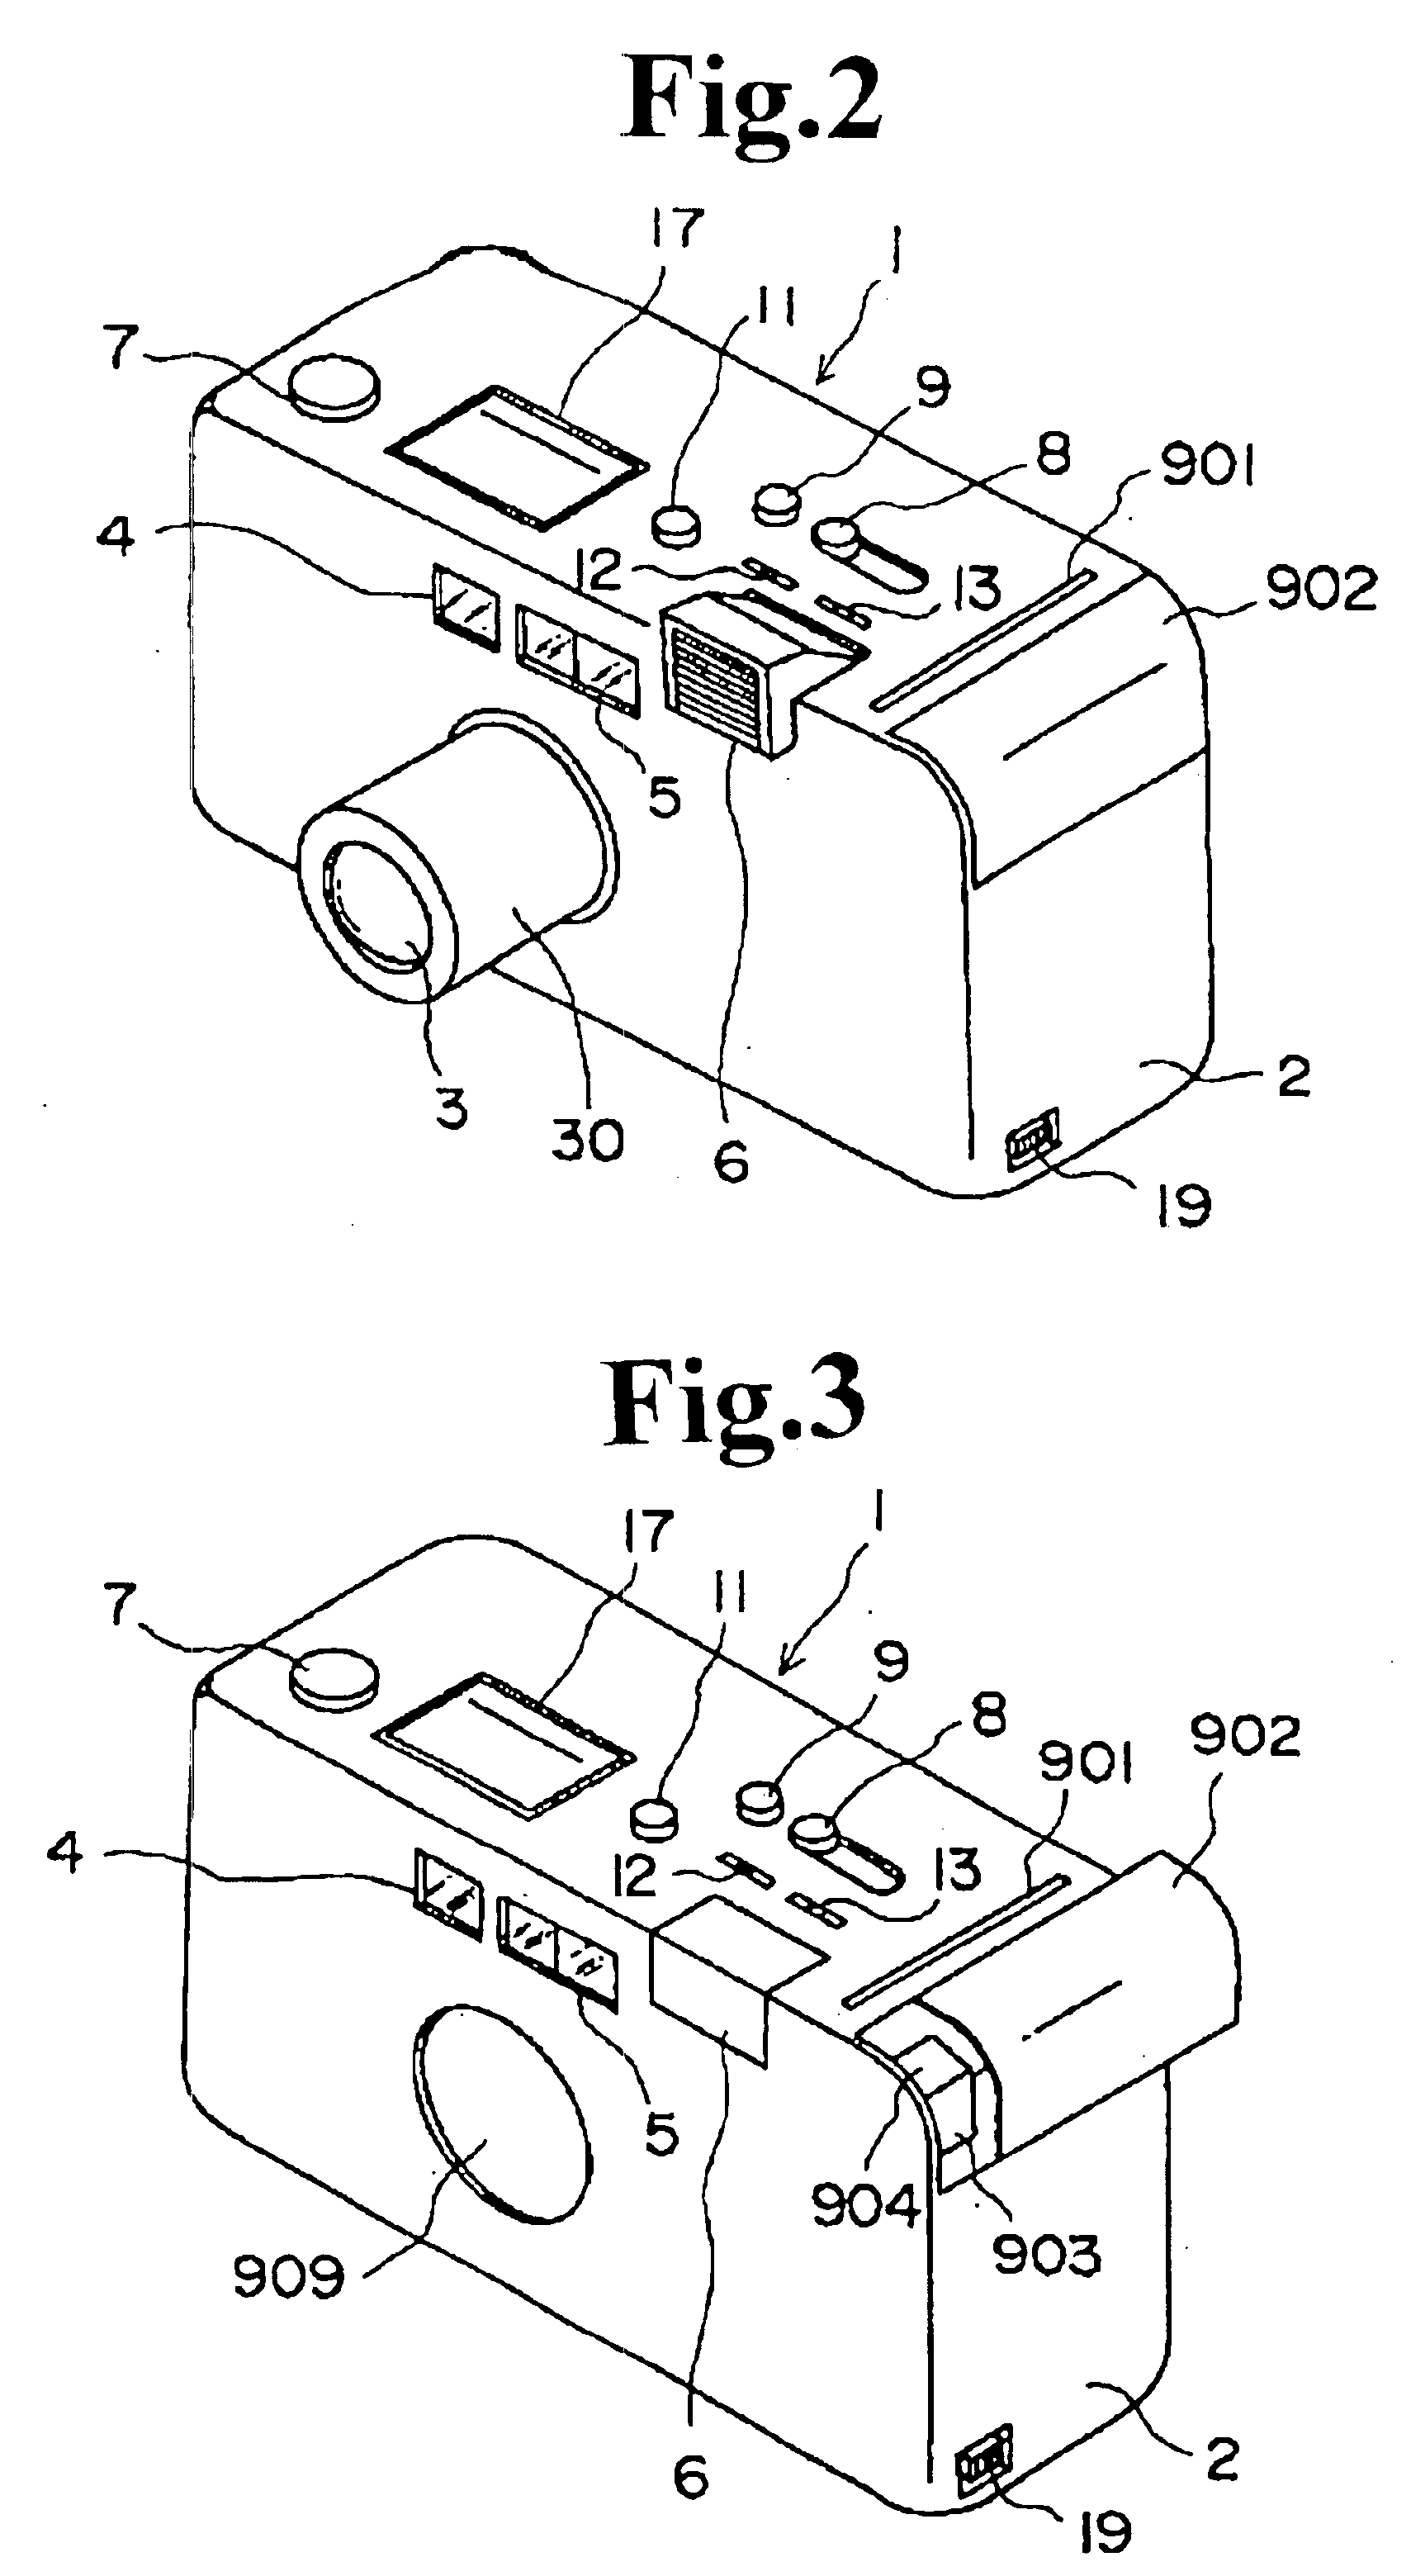 Digital camera having a printing function in which a movable camera part is moved from an in-use position to an out-of-use position during printing